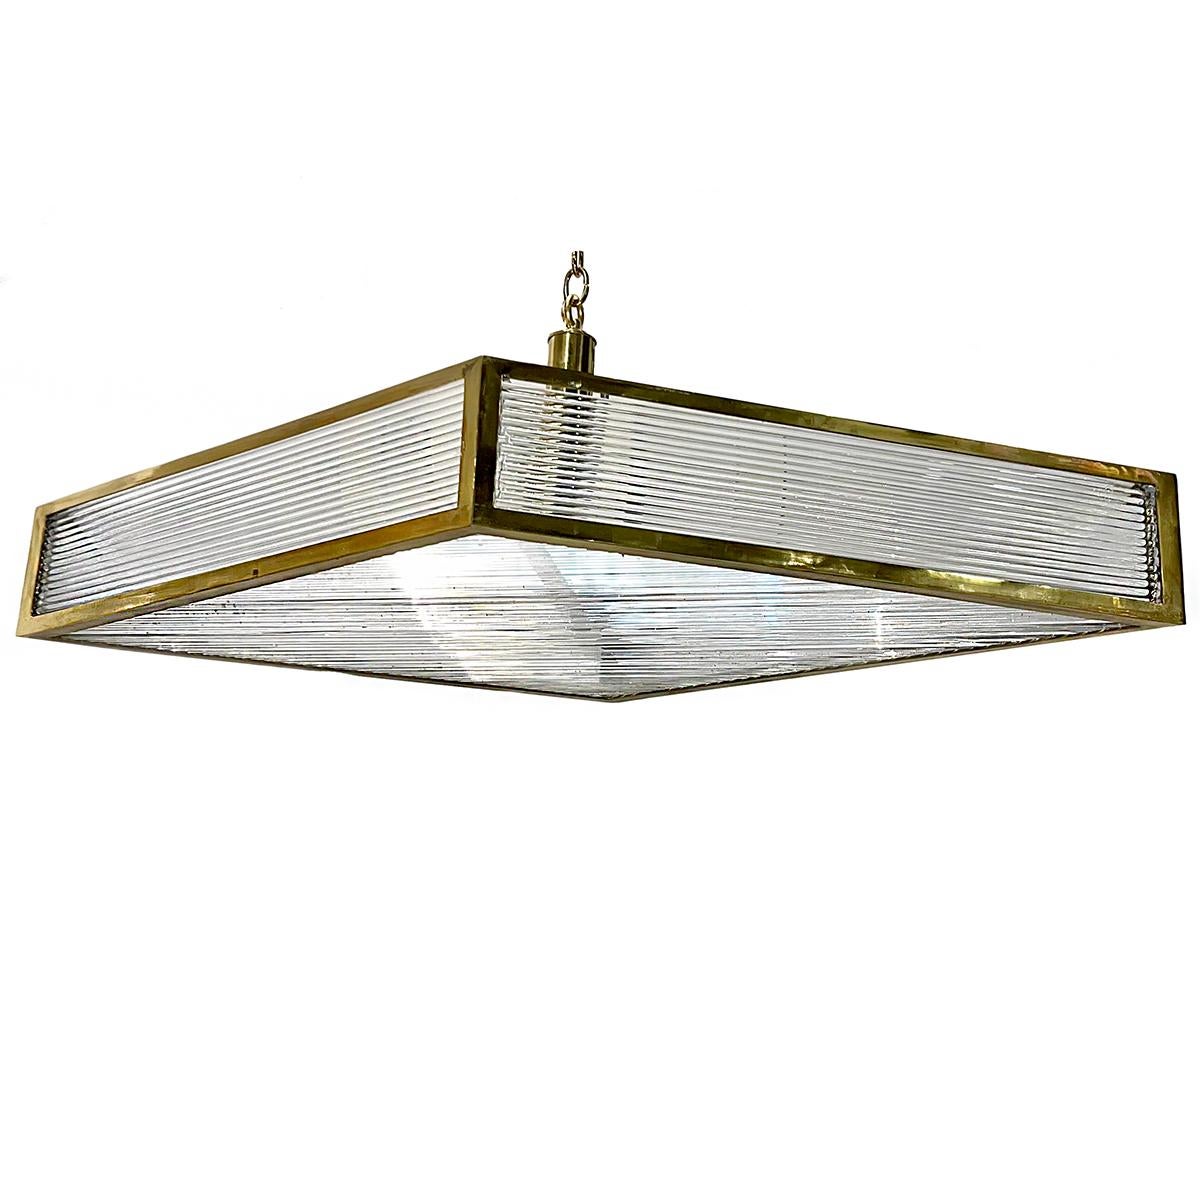 Mid-20th Century Moderne Gilt Bronze Diamond Shaped Glass Rods Fixture For Sale